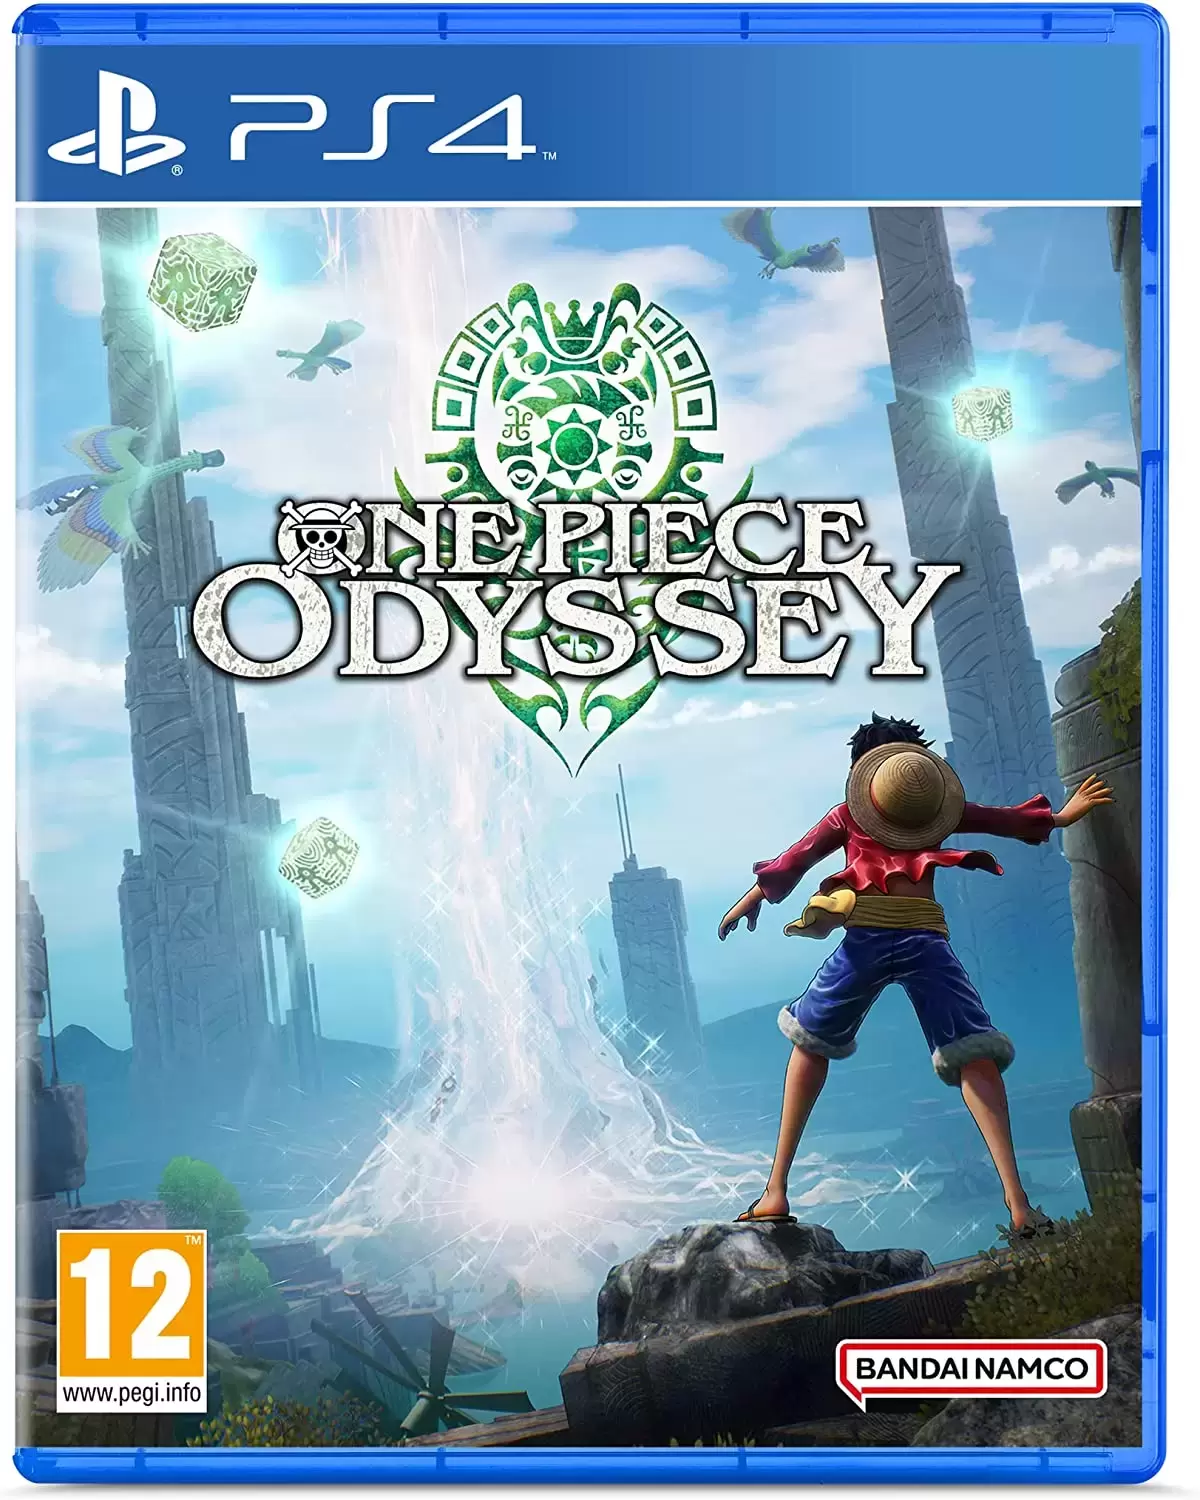 PS4 Games - One Piece Odyssey